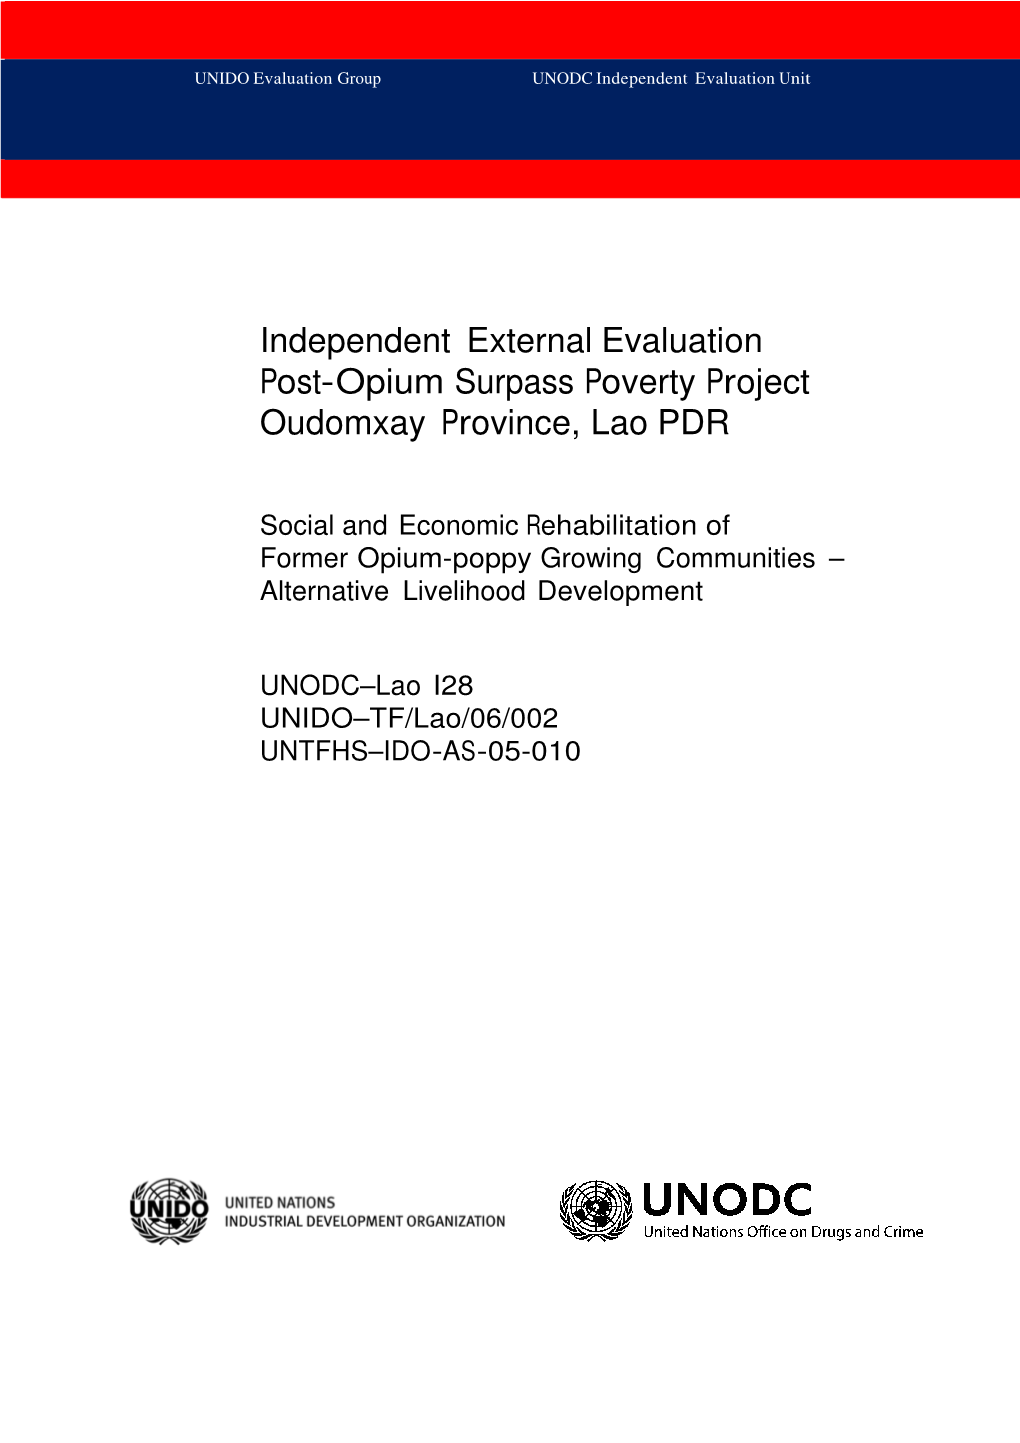 Independent External Evaluation Post-Opium Surpass Poverty Project Oudomxay Province, Lao PDR